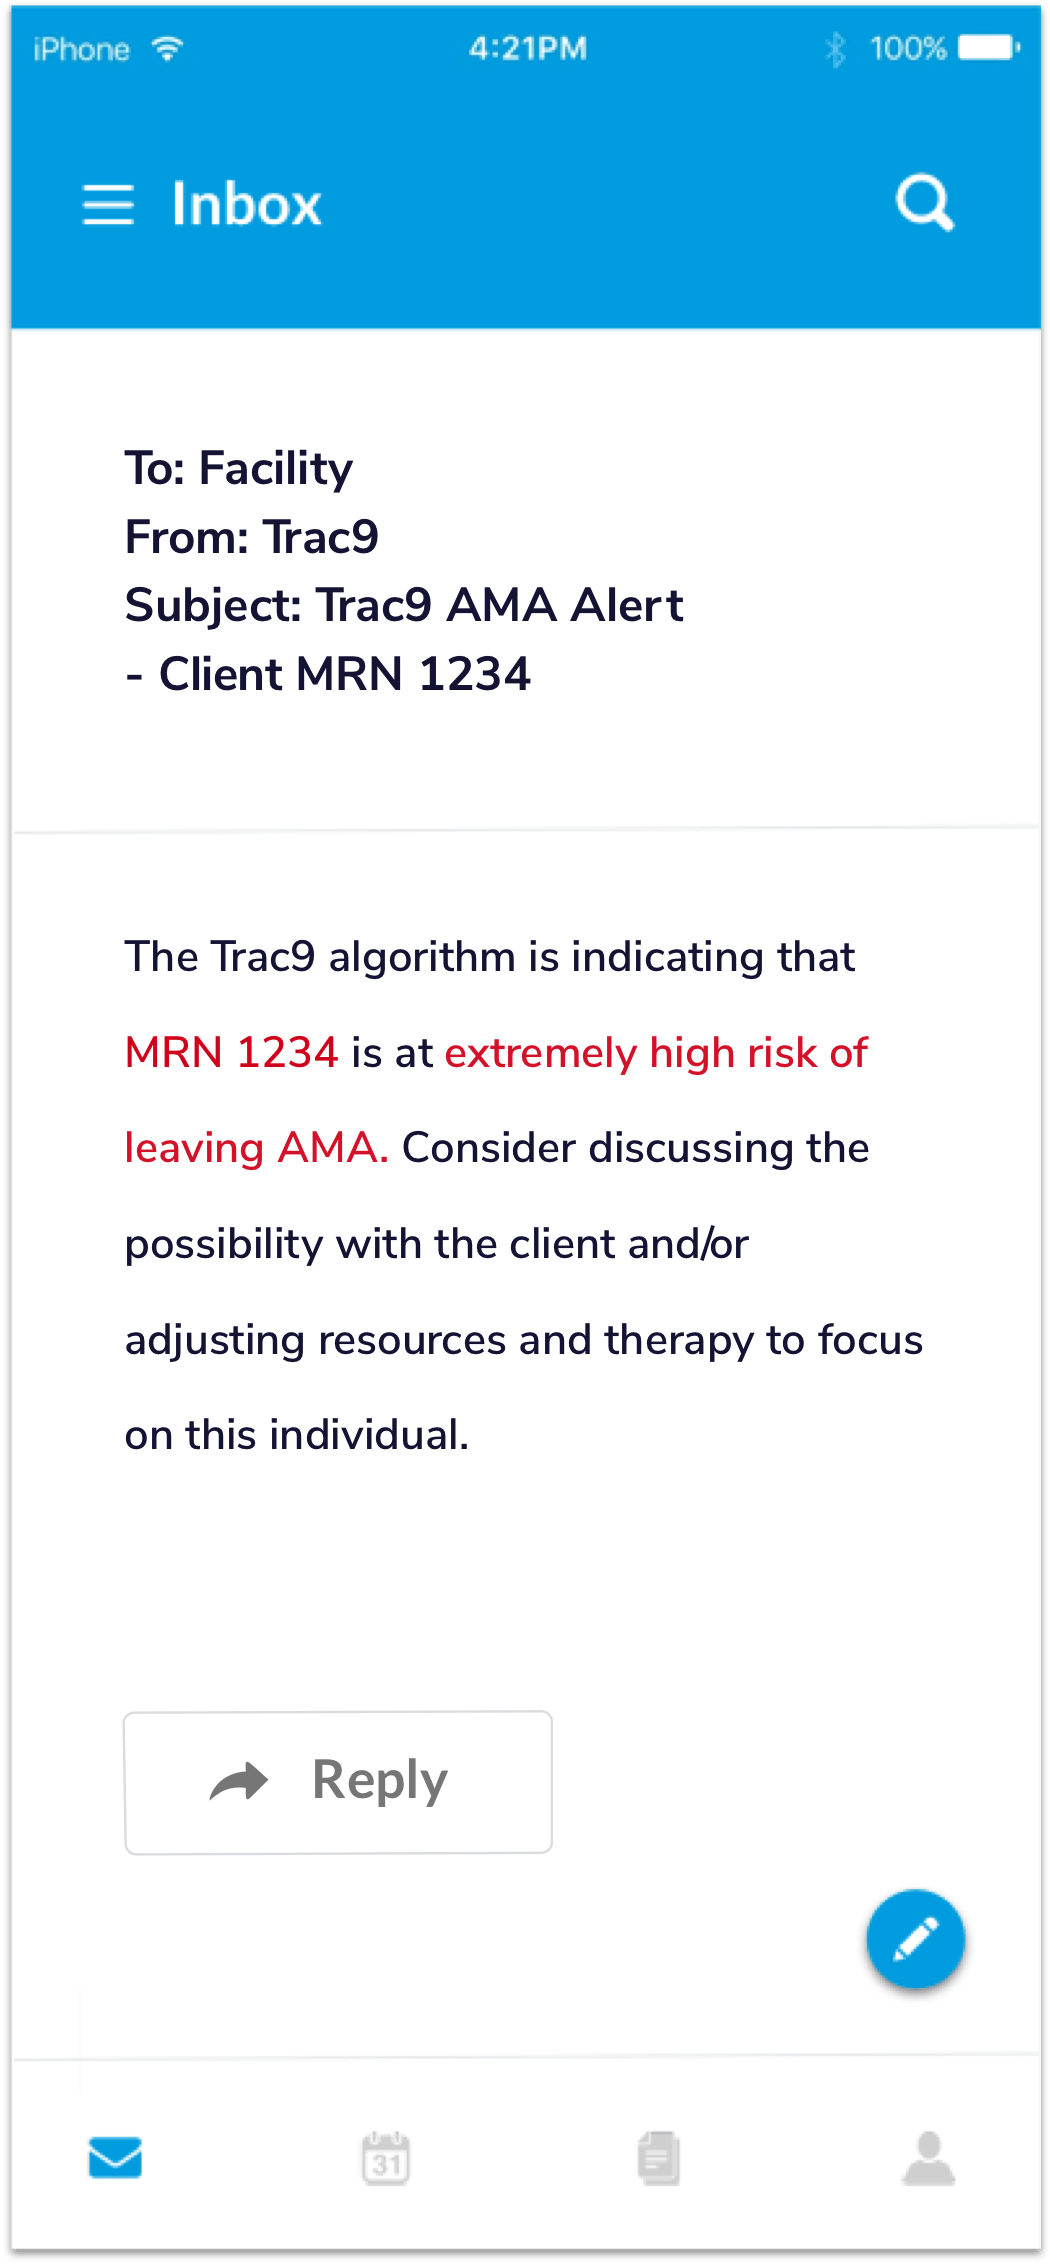 Email from TRAC9 reegarding an AMA alert